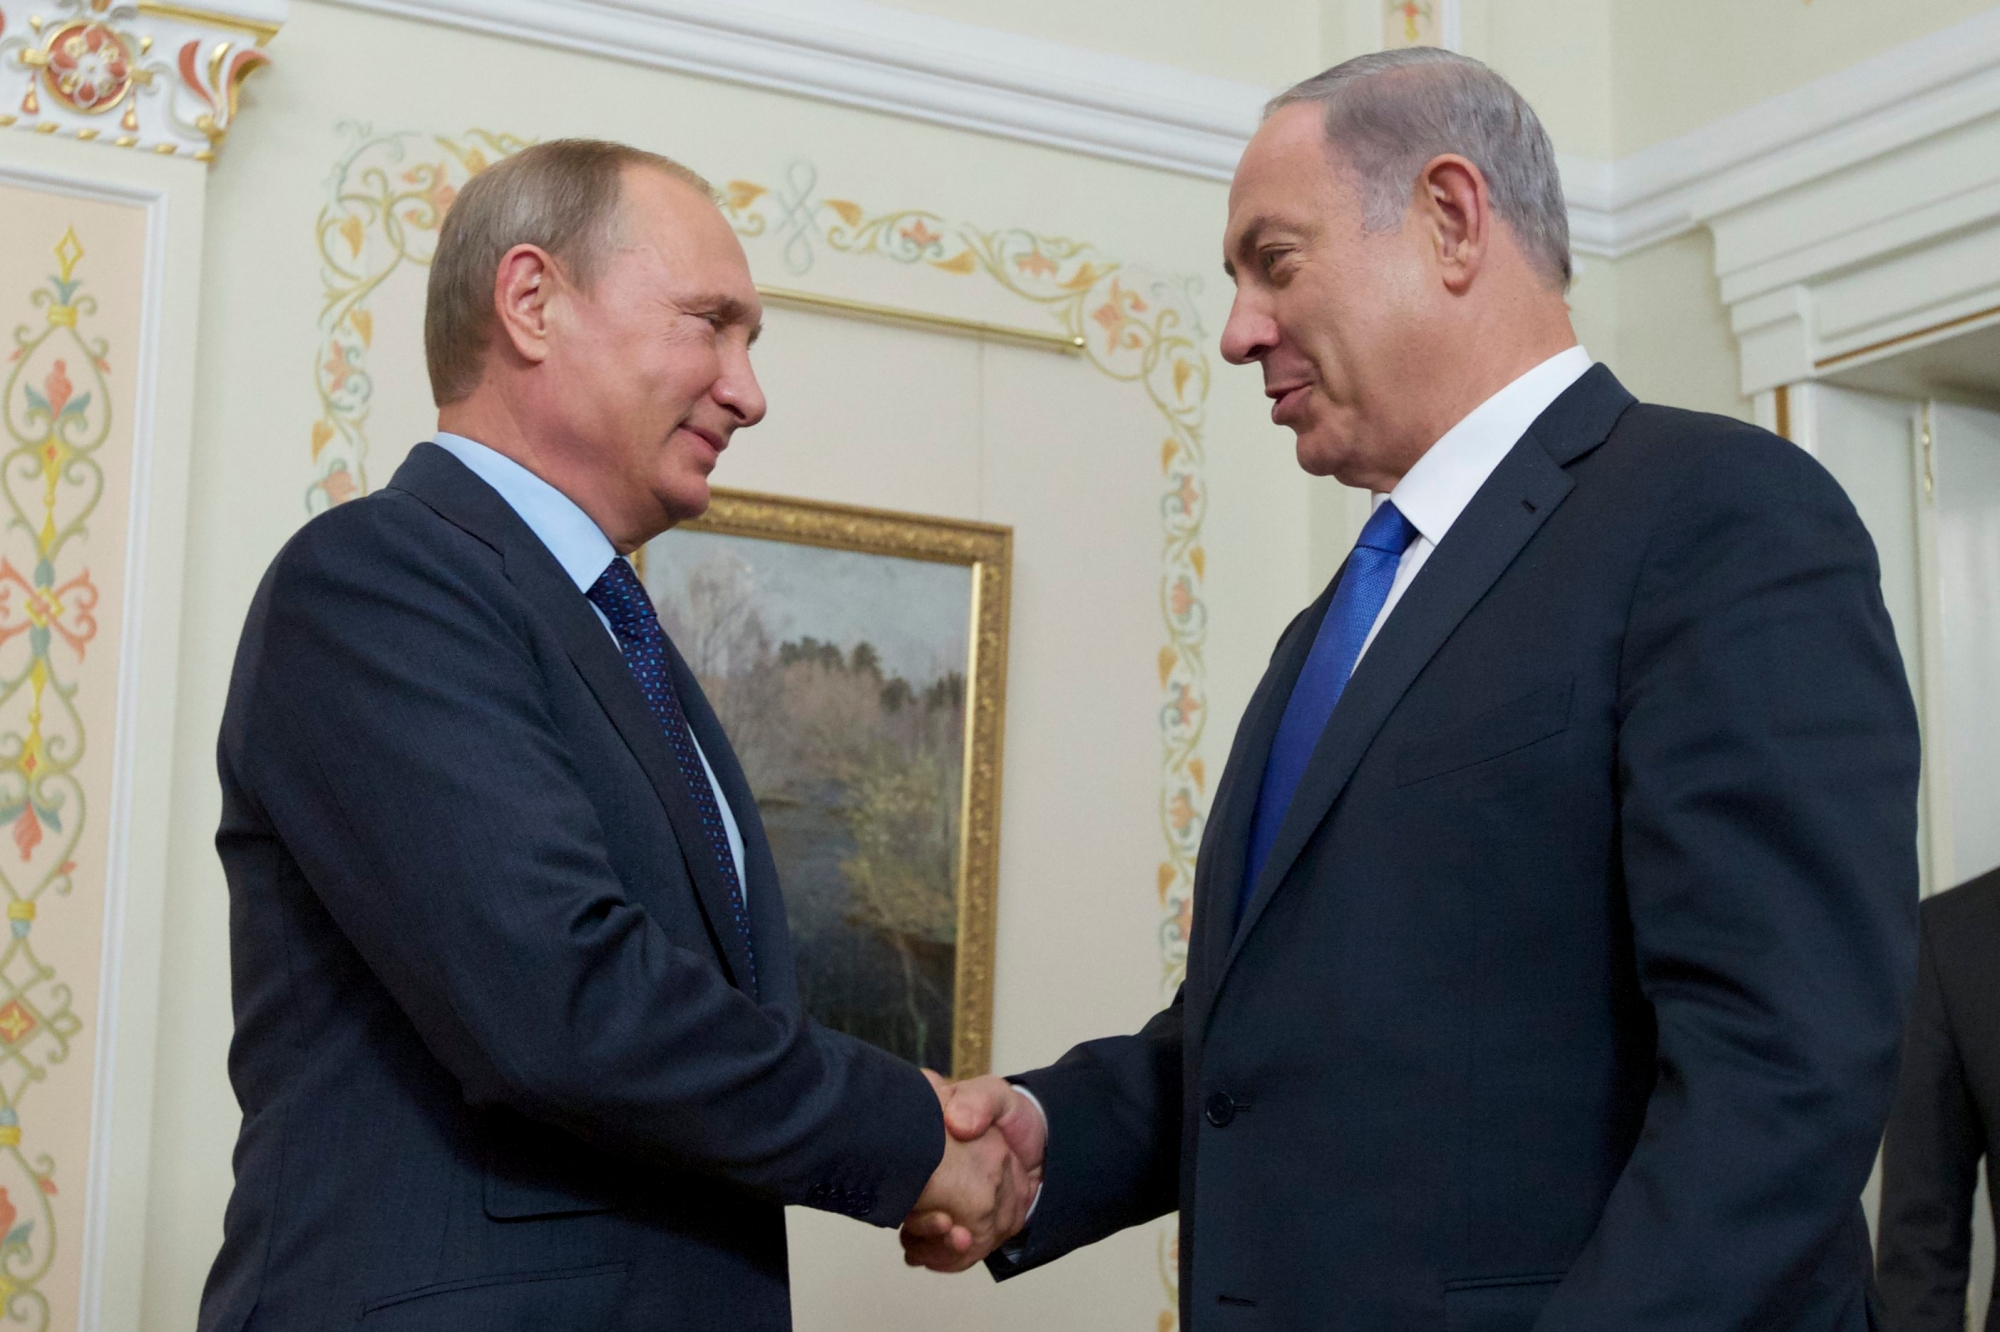 Russian President Vladimir Putin shakes hands with Israeli Prime Minister Benjamin Netanyahu, right, during their meeting in the Novo-Ogaryovo residence, outside Moscow, Russia, Monday, Sept. 21, 2015. (AP Photo/Ivan Sekretarev, Pool) RUSSIA ISRAEL